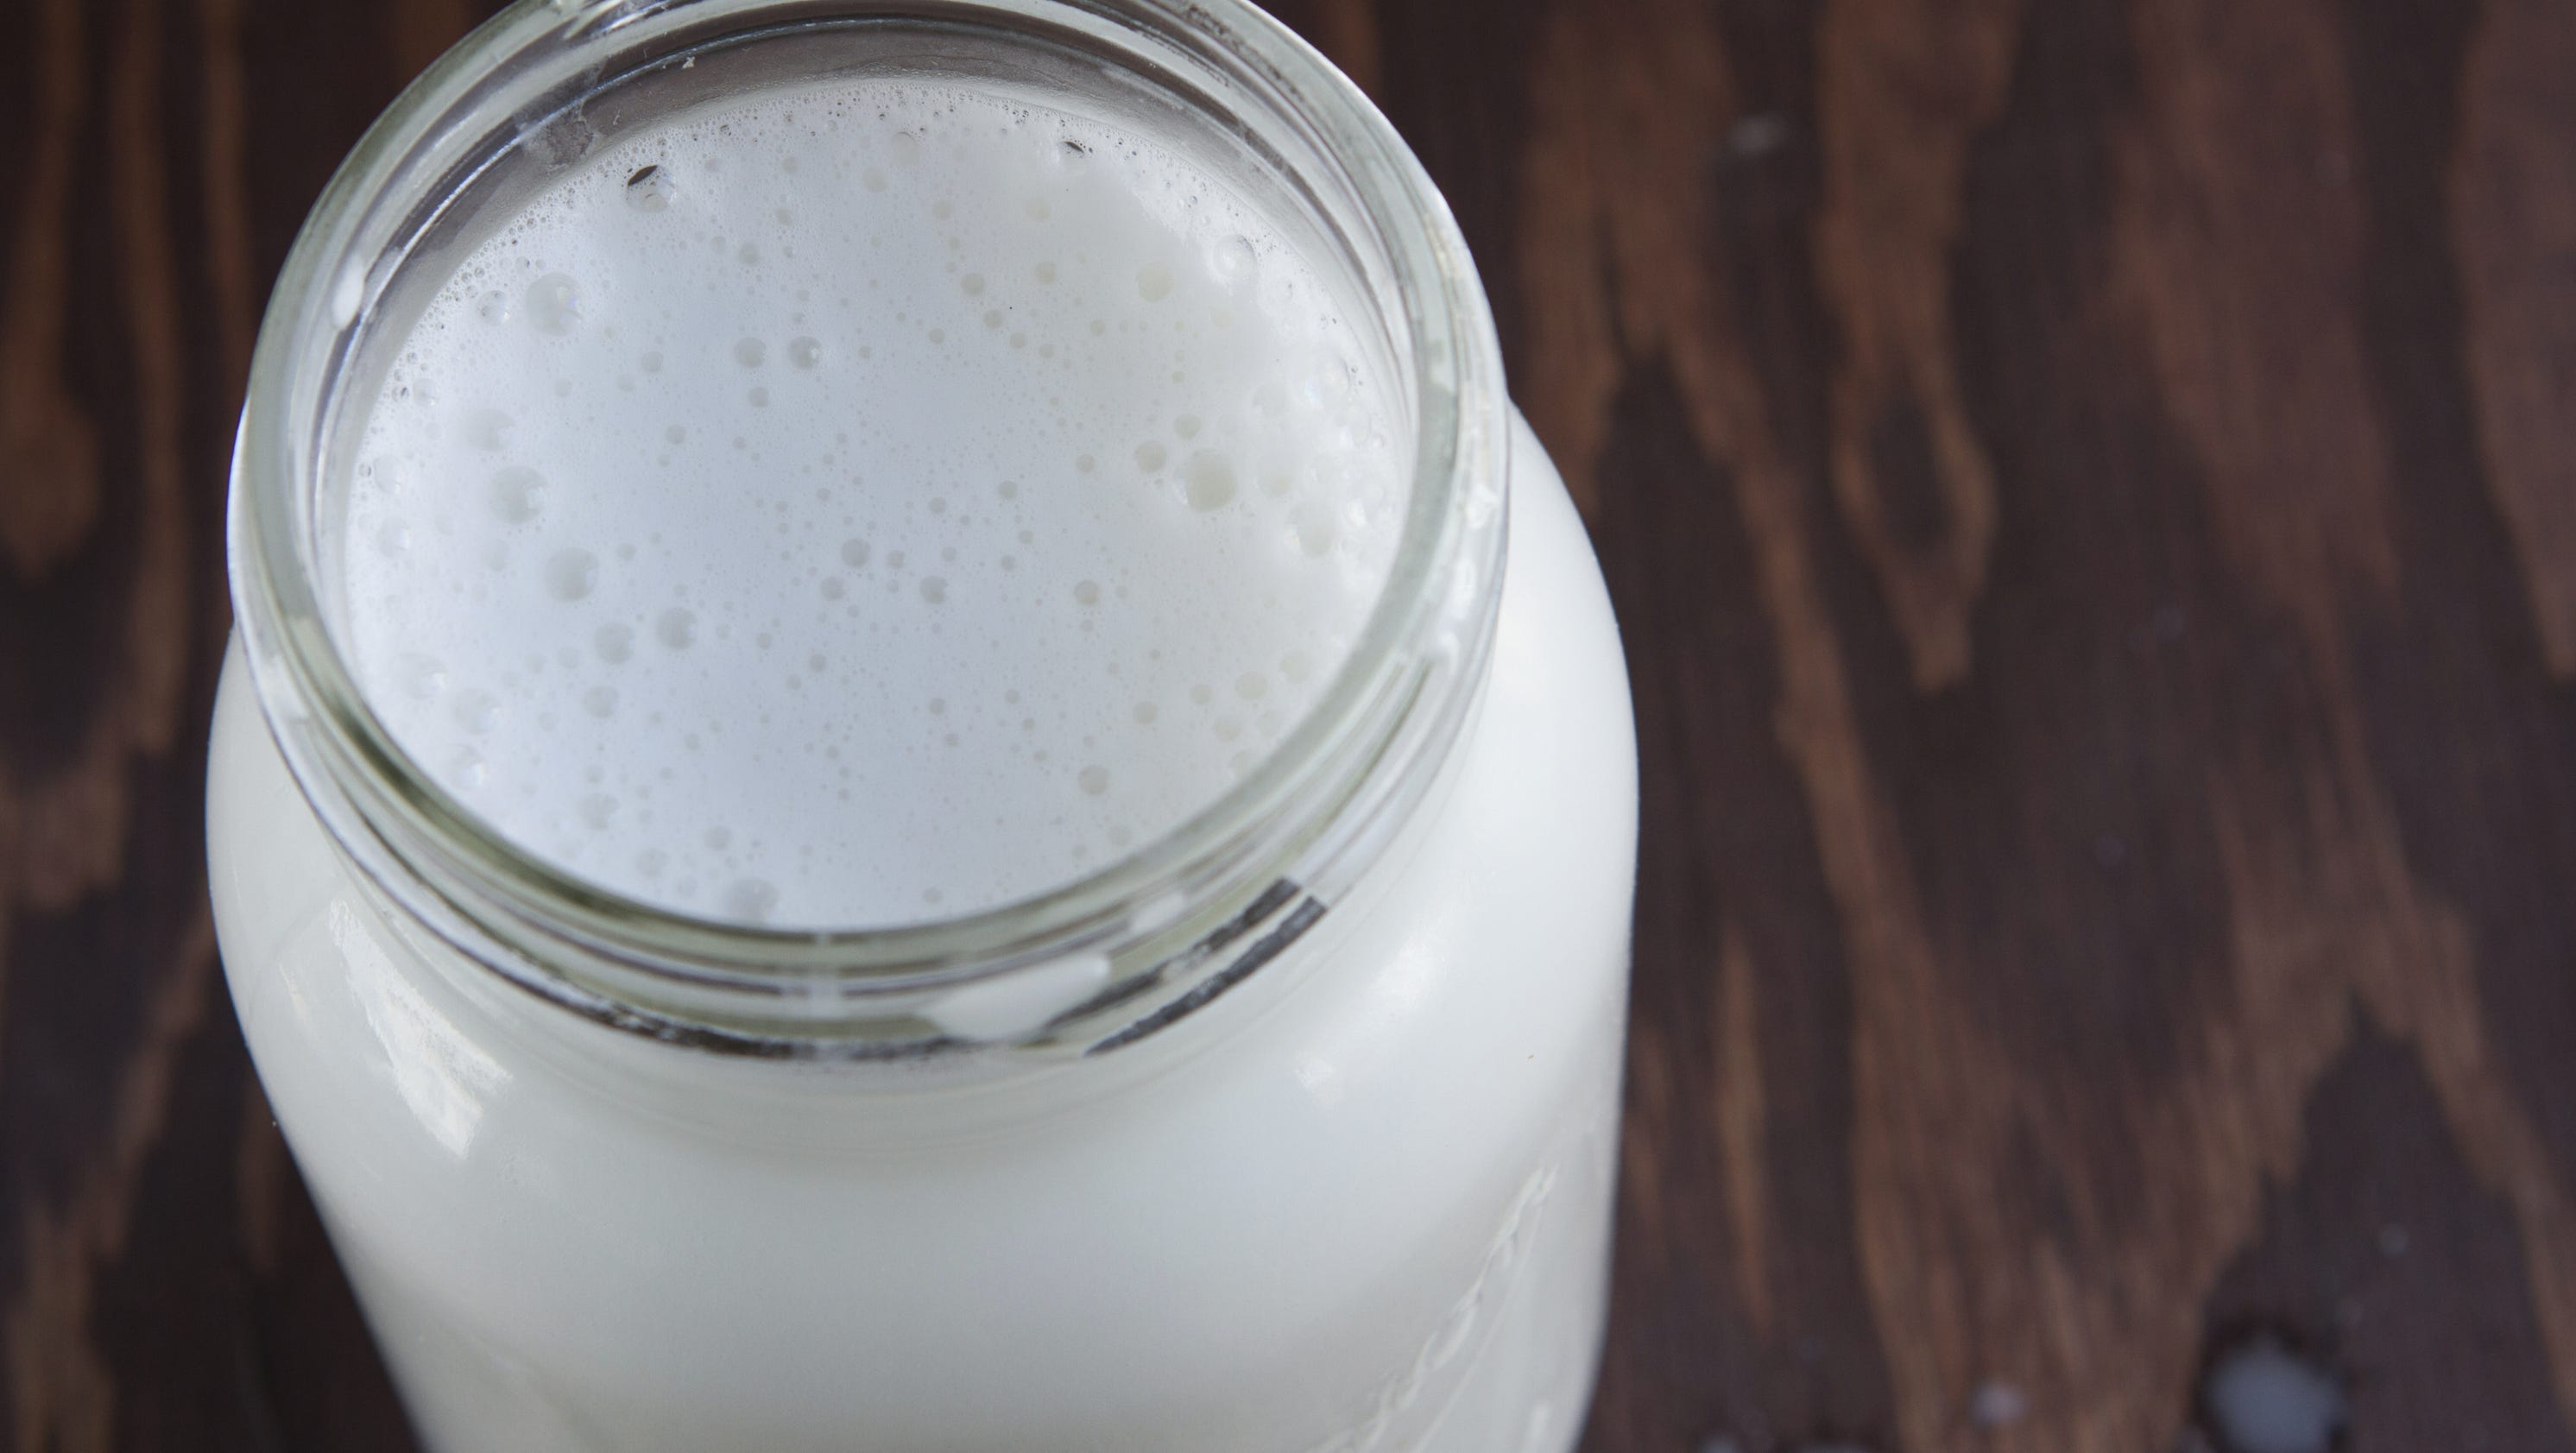 How is lactose removed from milk?